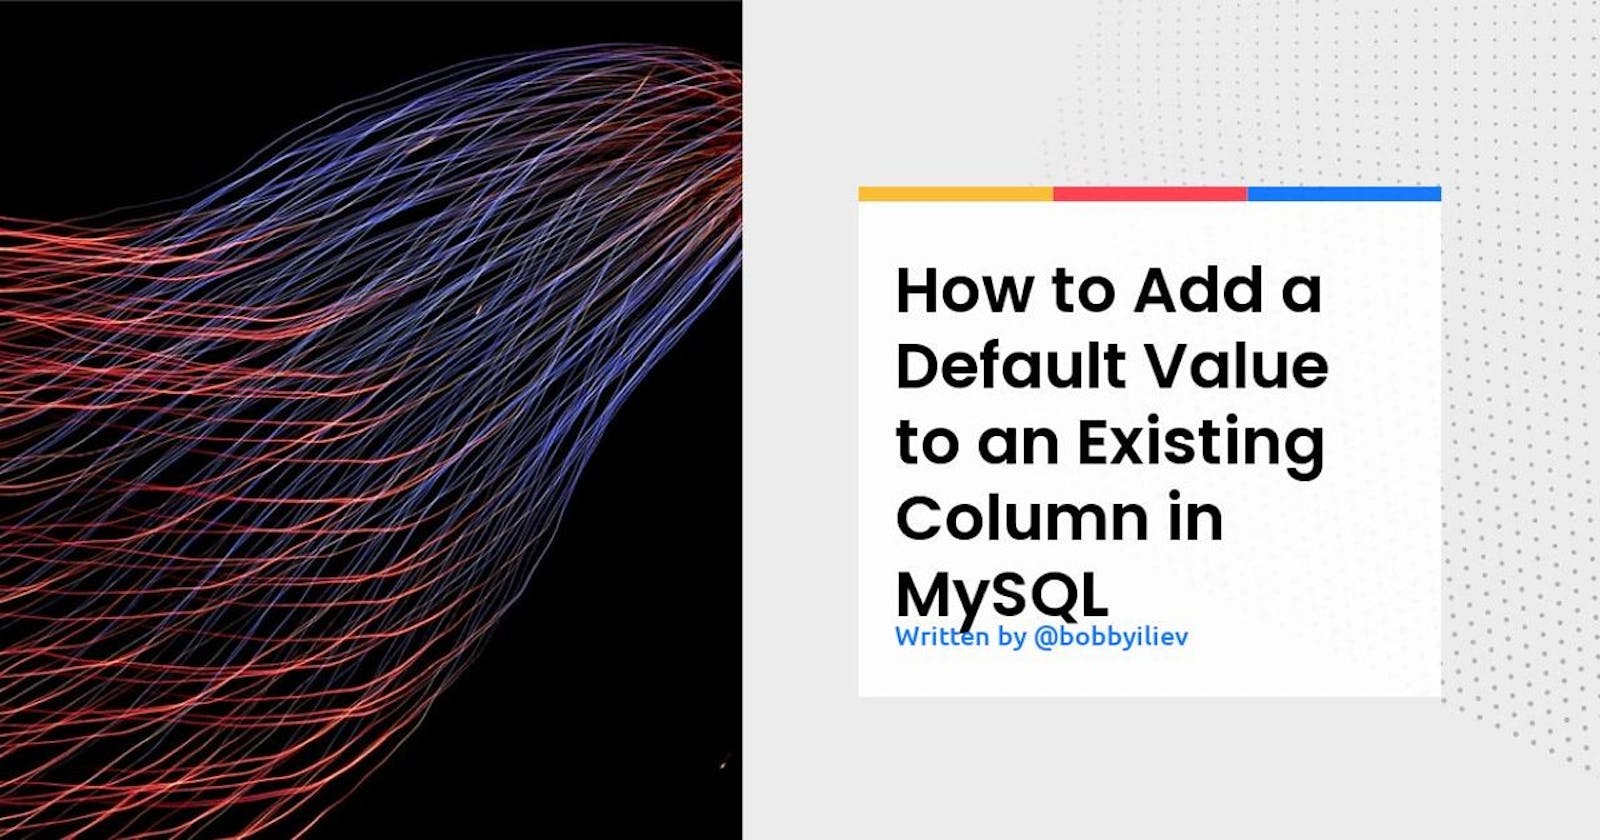 How to Add a Default Value to an Existing Column in MySQL